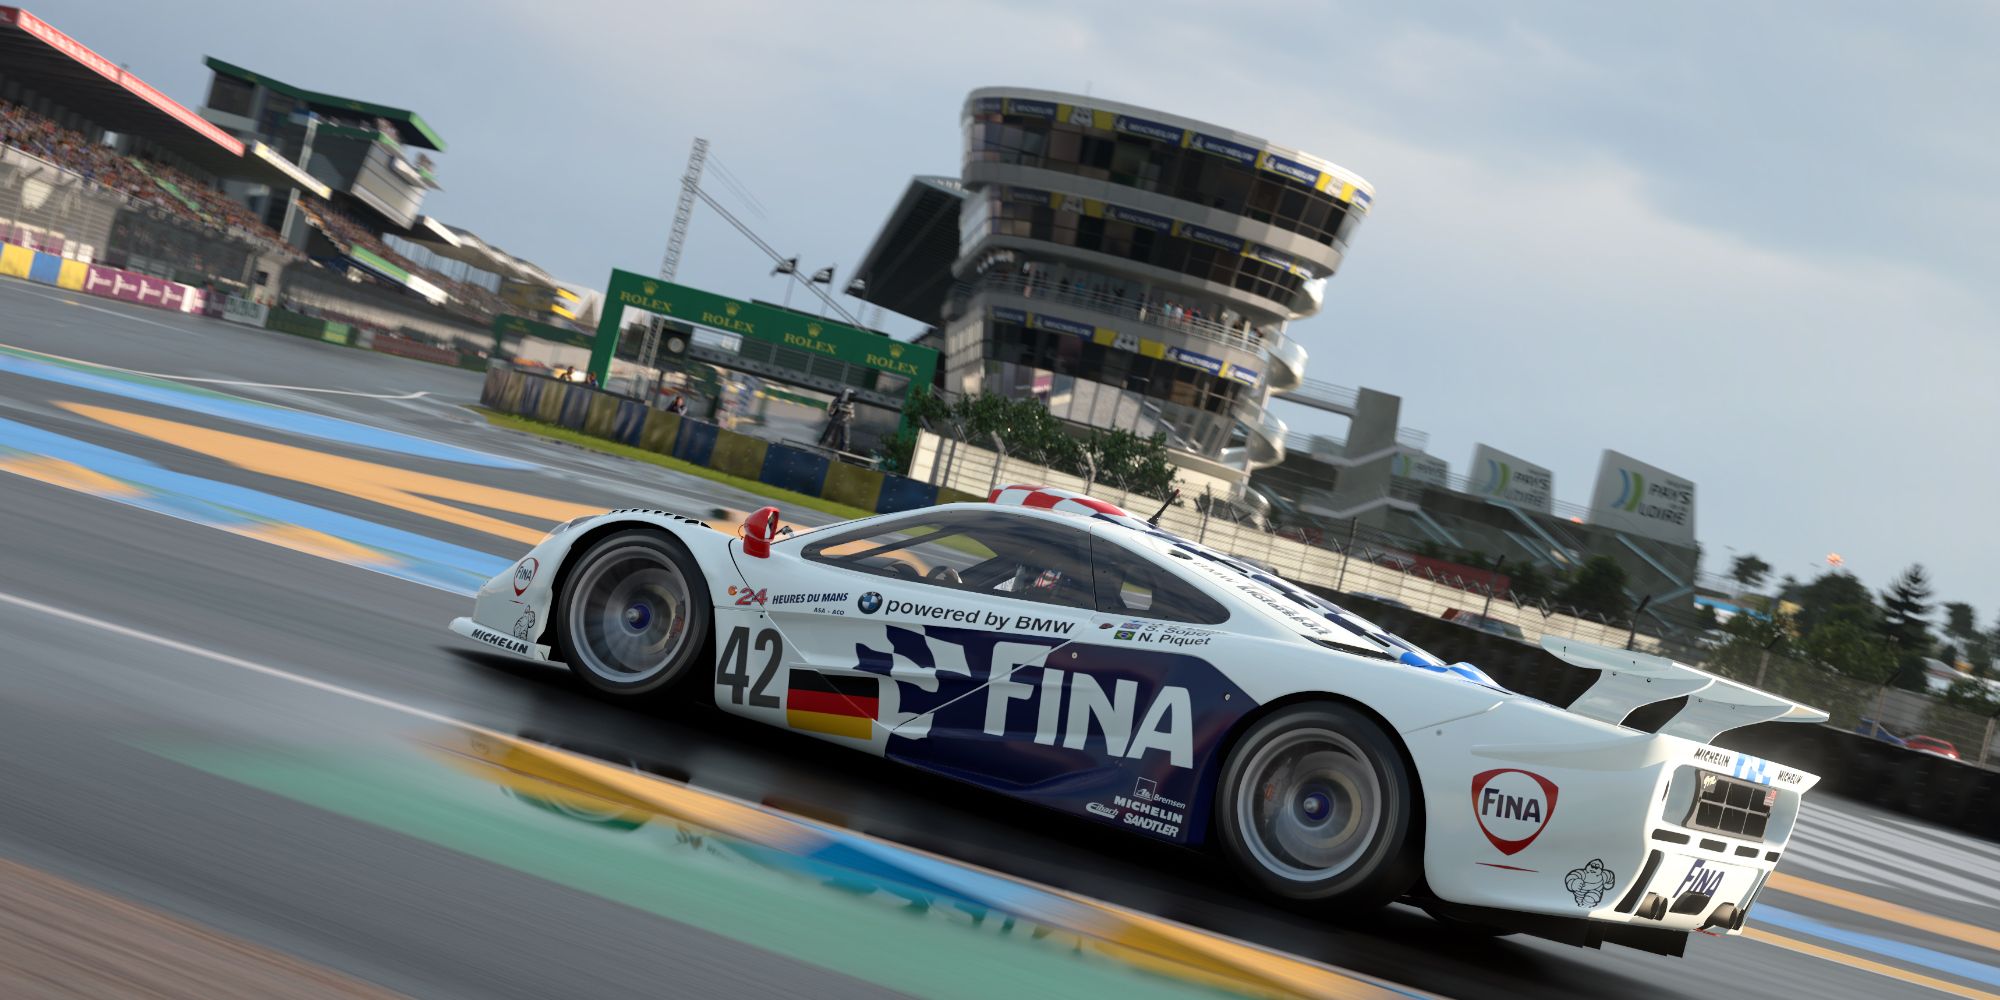 Gran Turismo 7's belated microtransactions feel like a strategy to avoid lower review scores